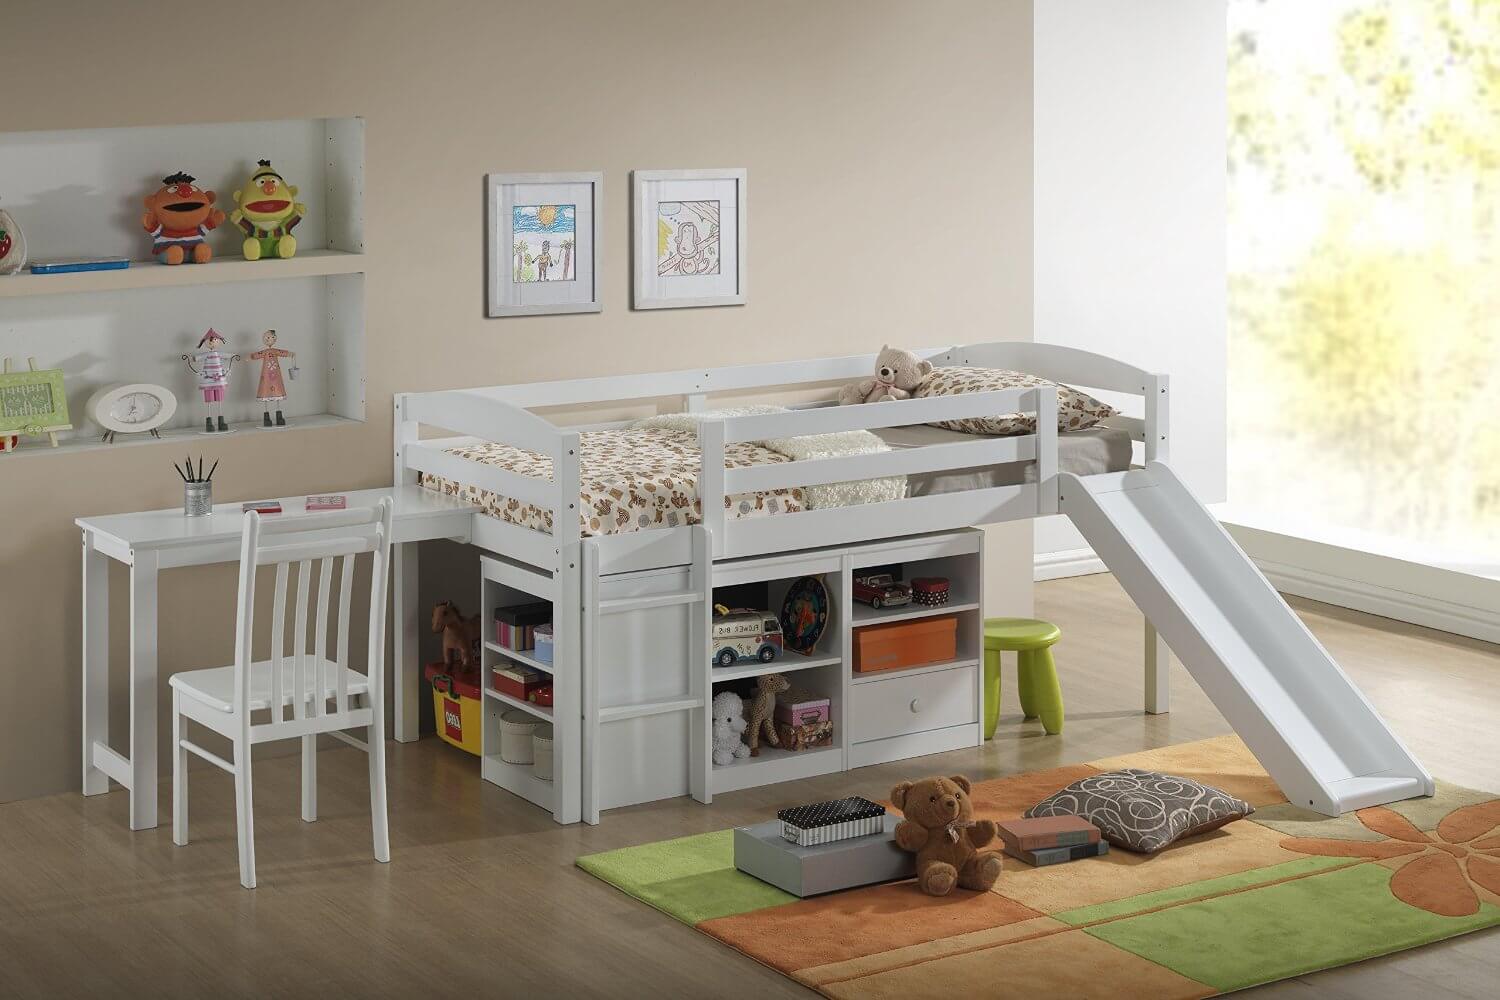 Check Out Wide Range of Loft Bed Options Available